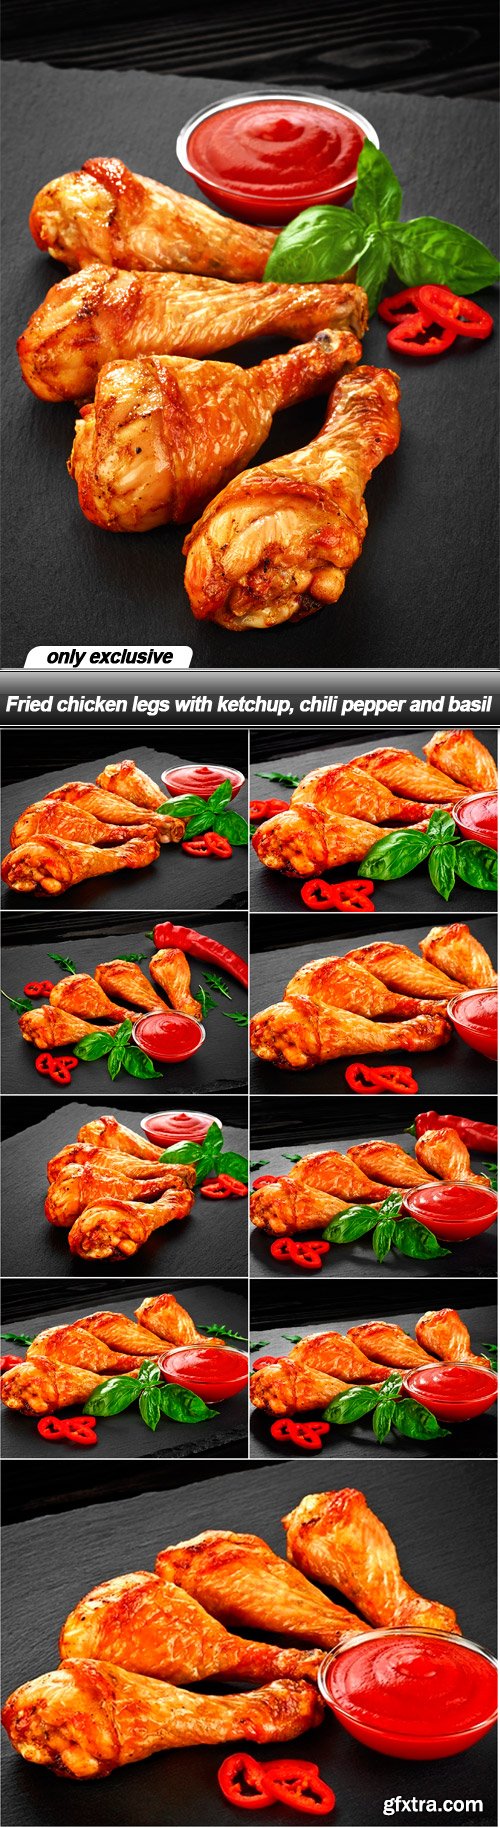 Fried chicken legs with ketchup, chili pepper and basil - 10 UHQ JPEG